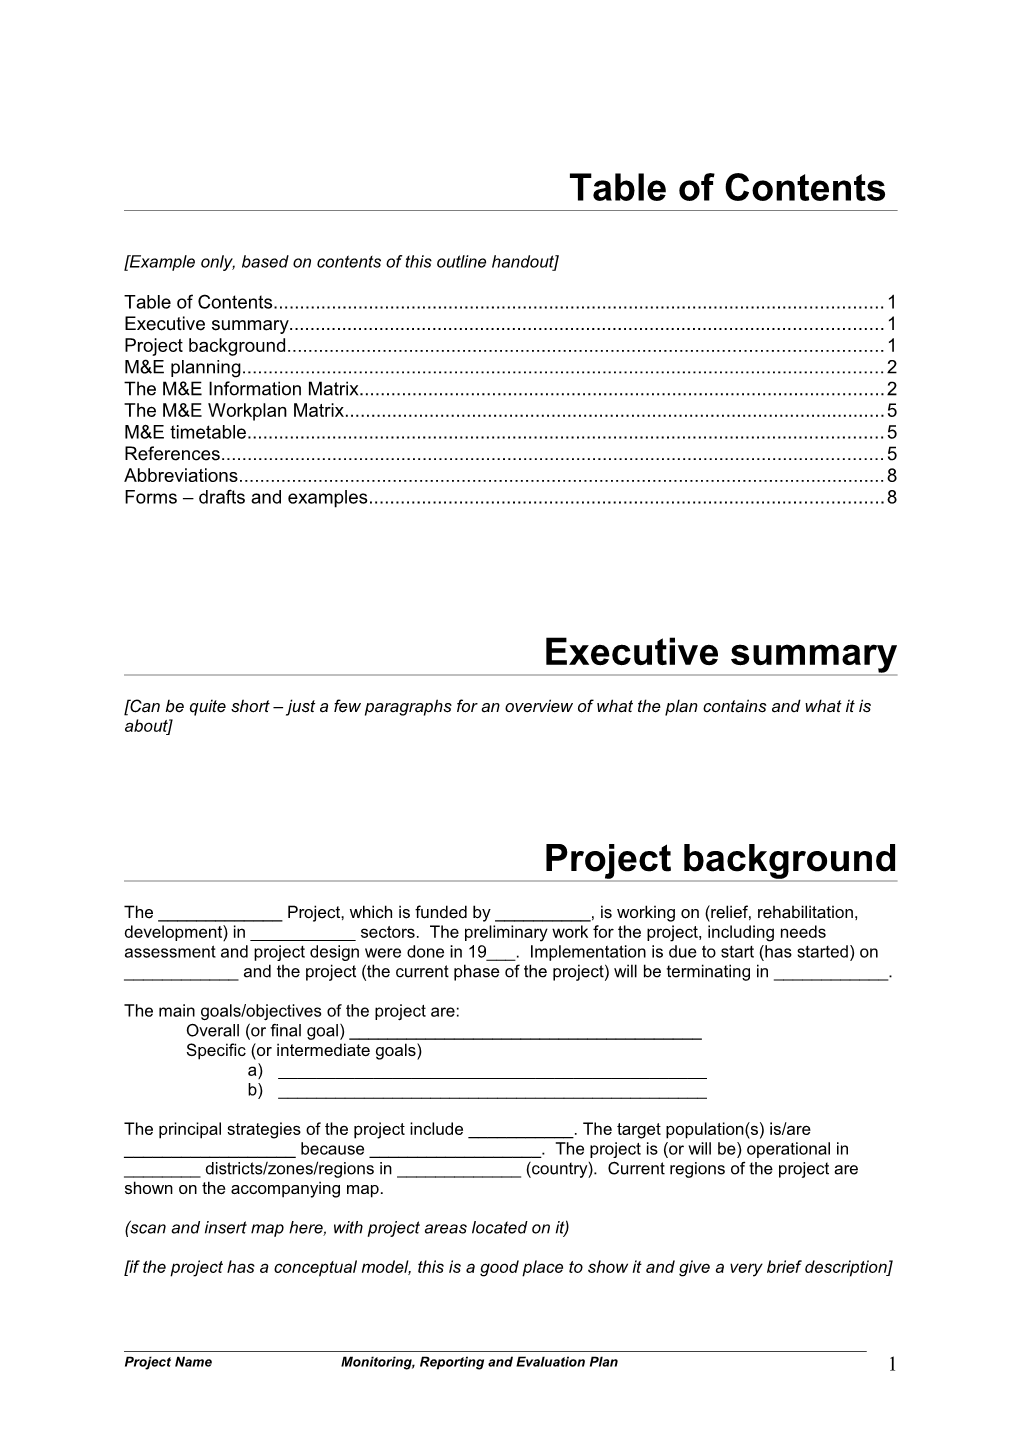 Project Monitoring And Evaluation Plans_CRC Handout